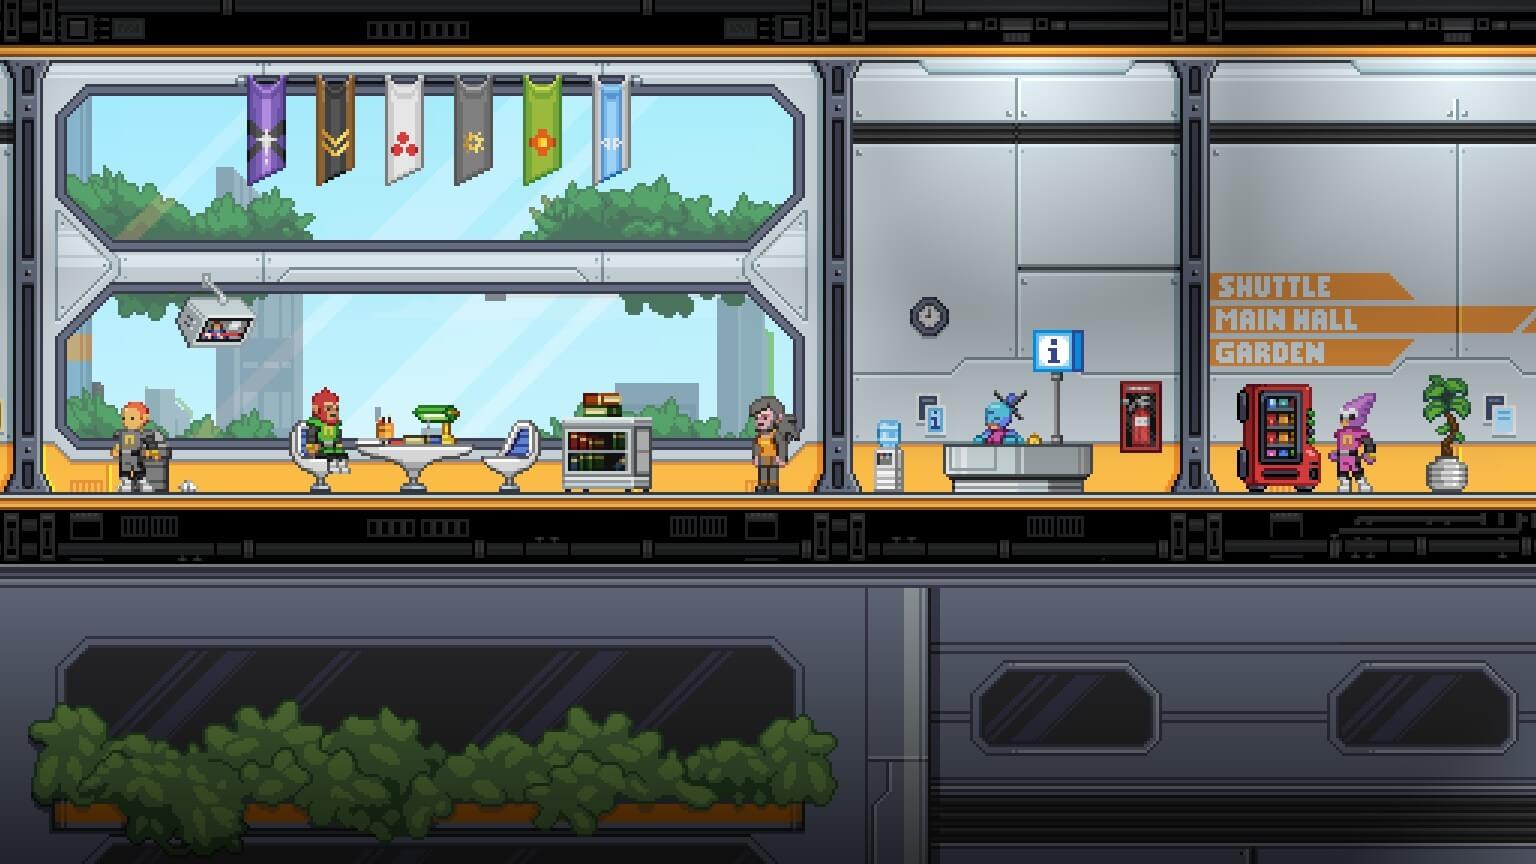 Game scene from Starbound